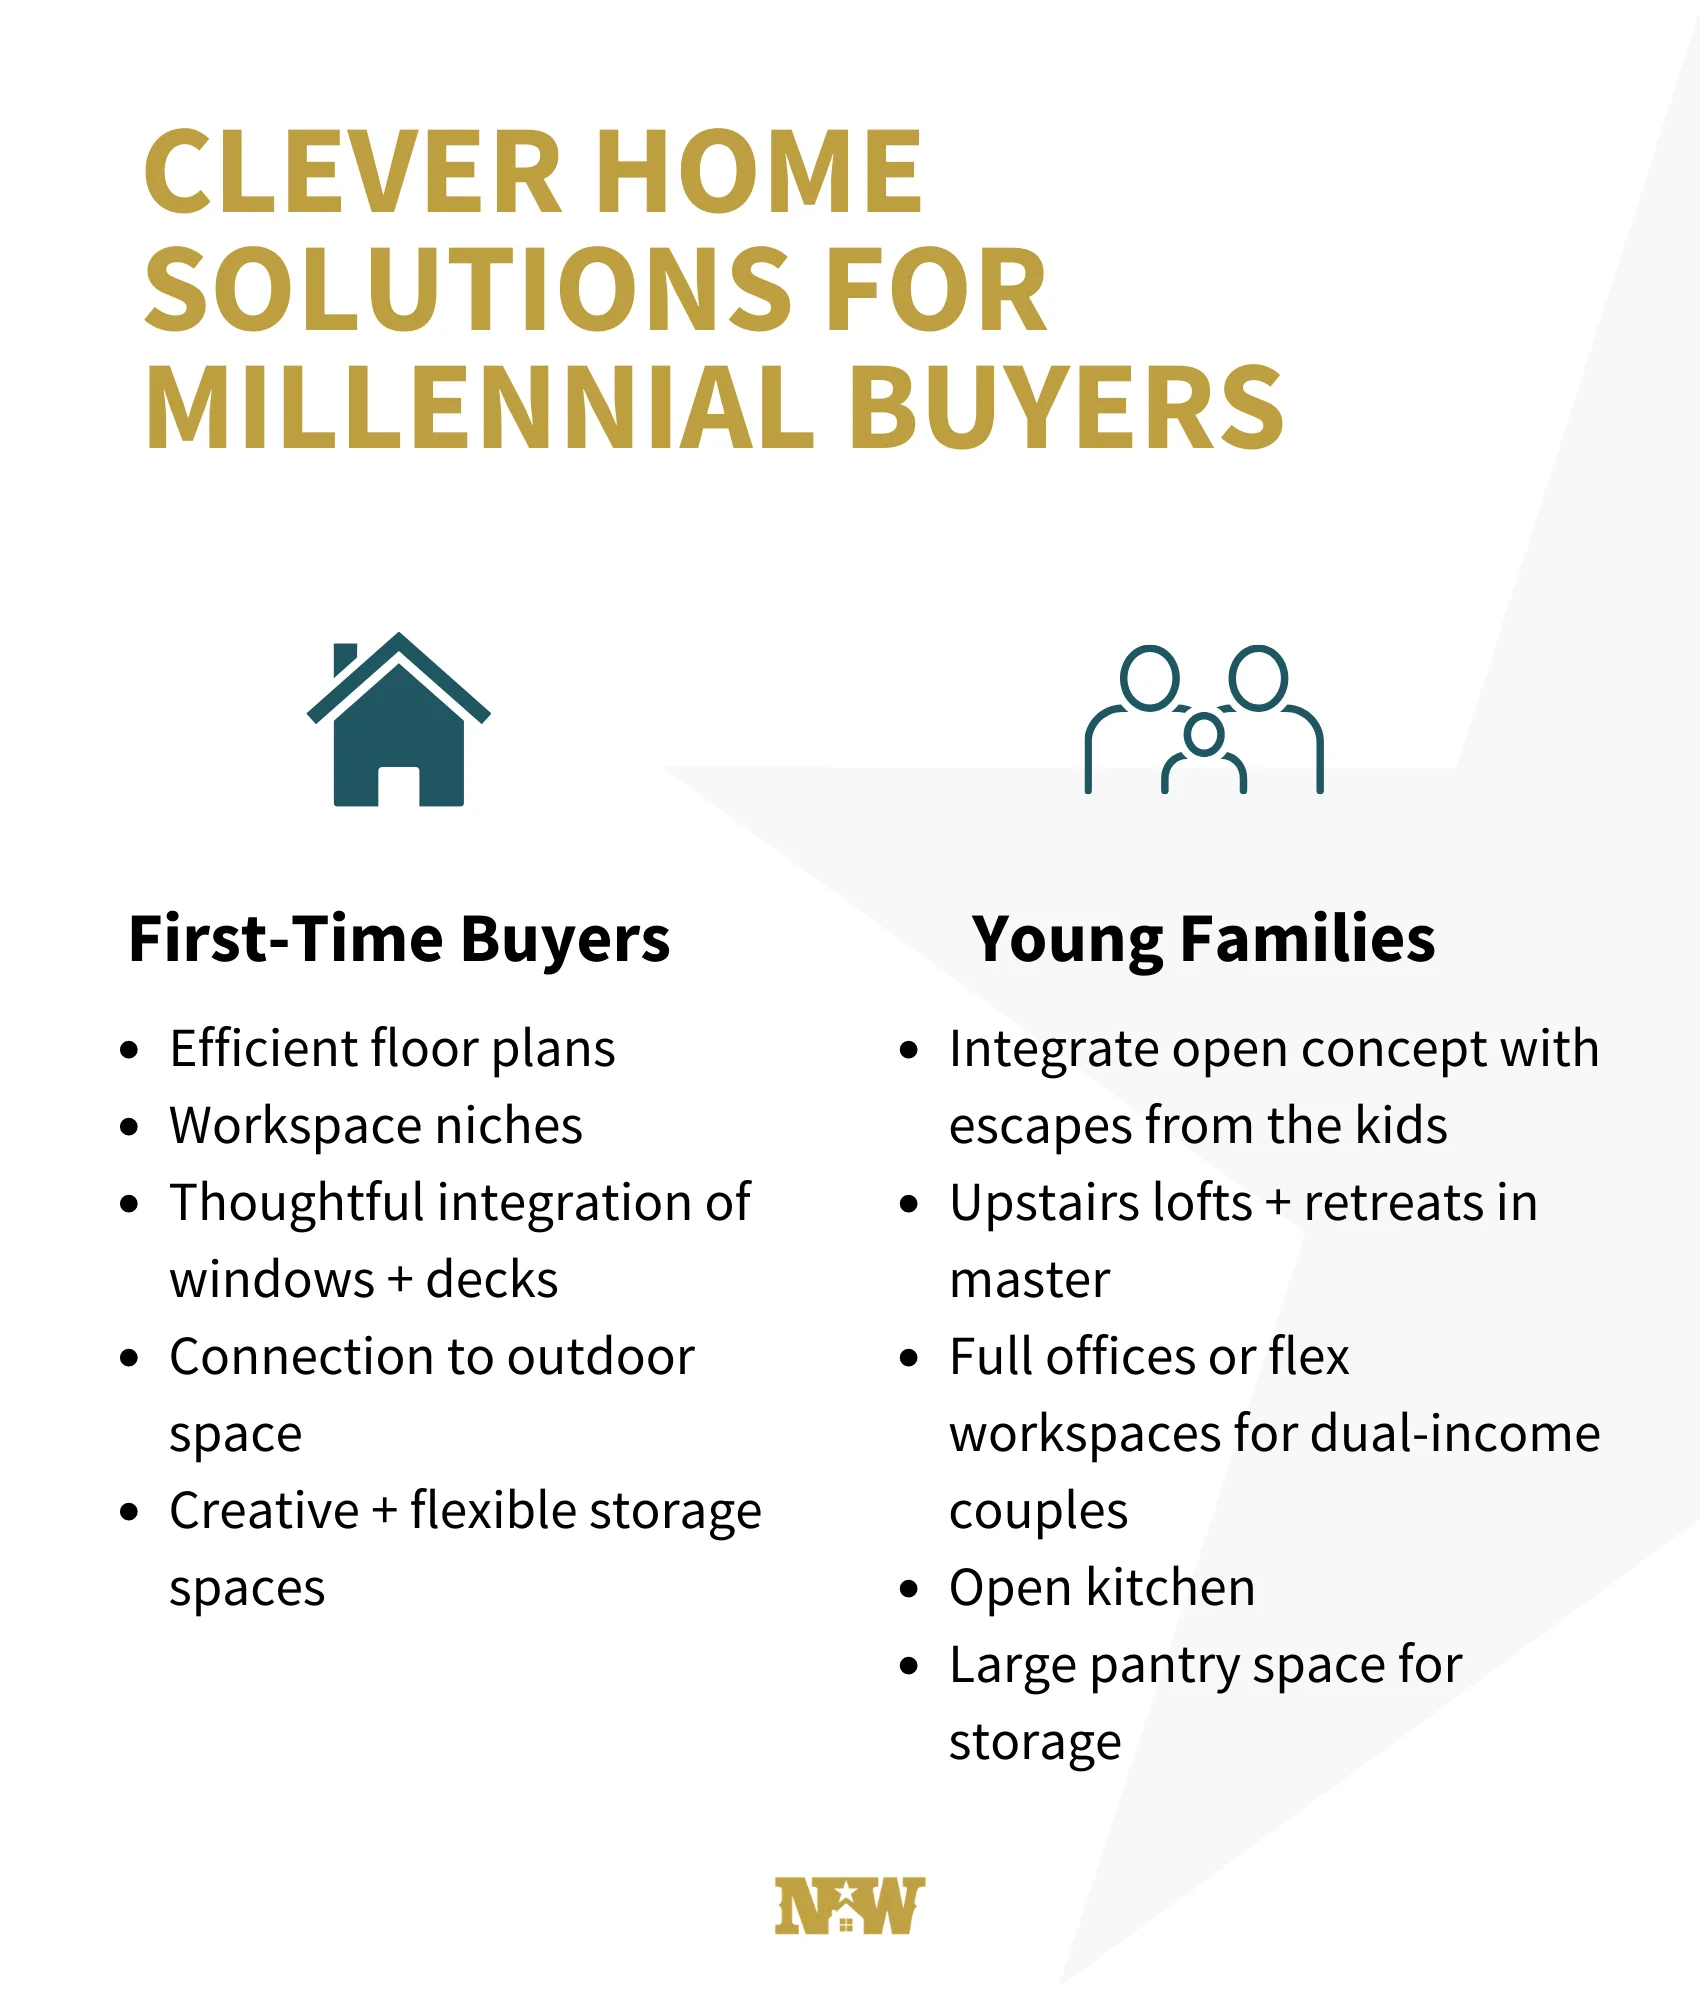 Clever Home Solutions for Millennial Buyers infographic